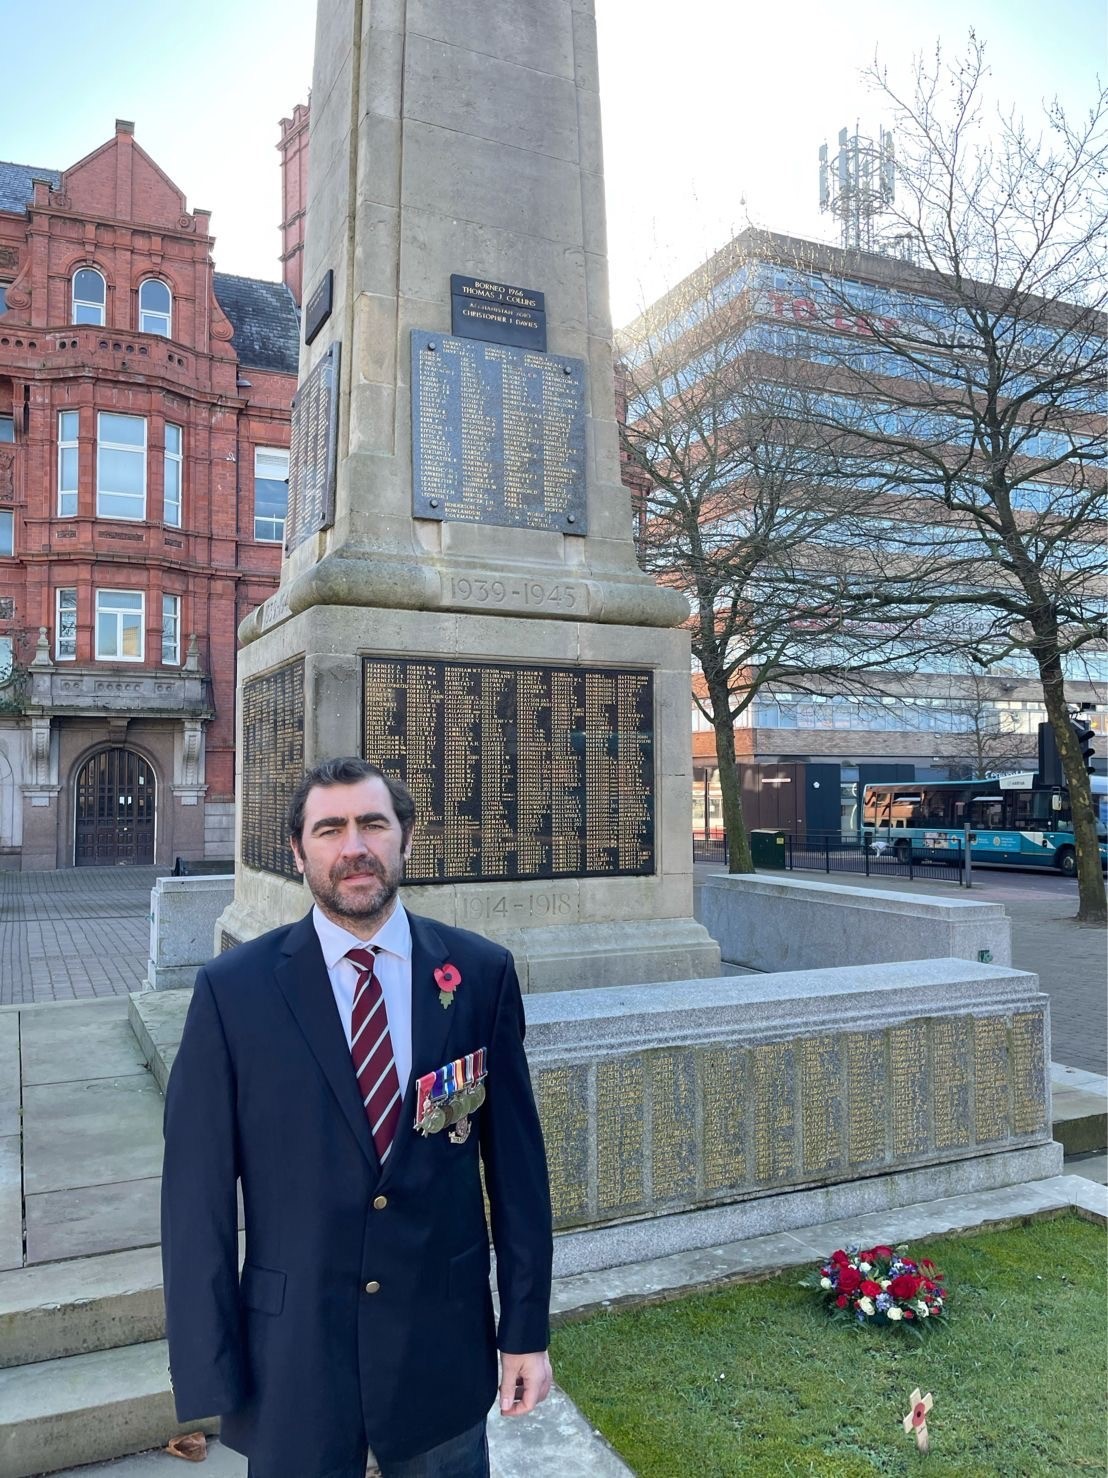 Andy Reid paid tribute to Captain Sir Tom at the St Helens war memorial